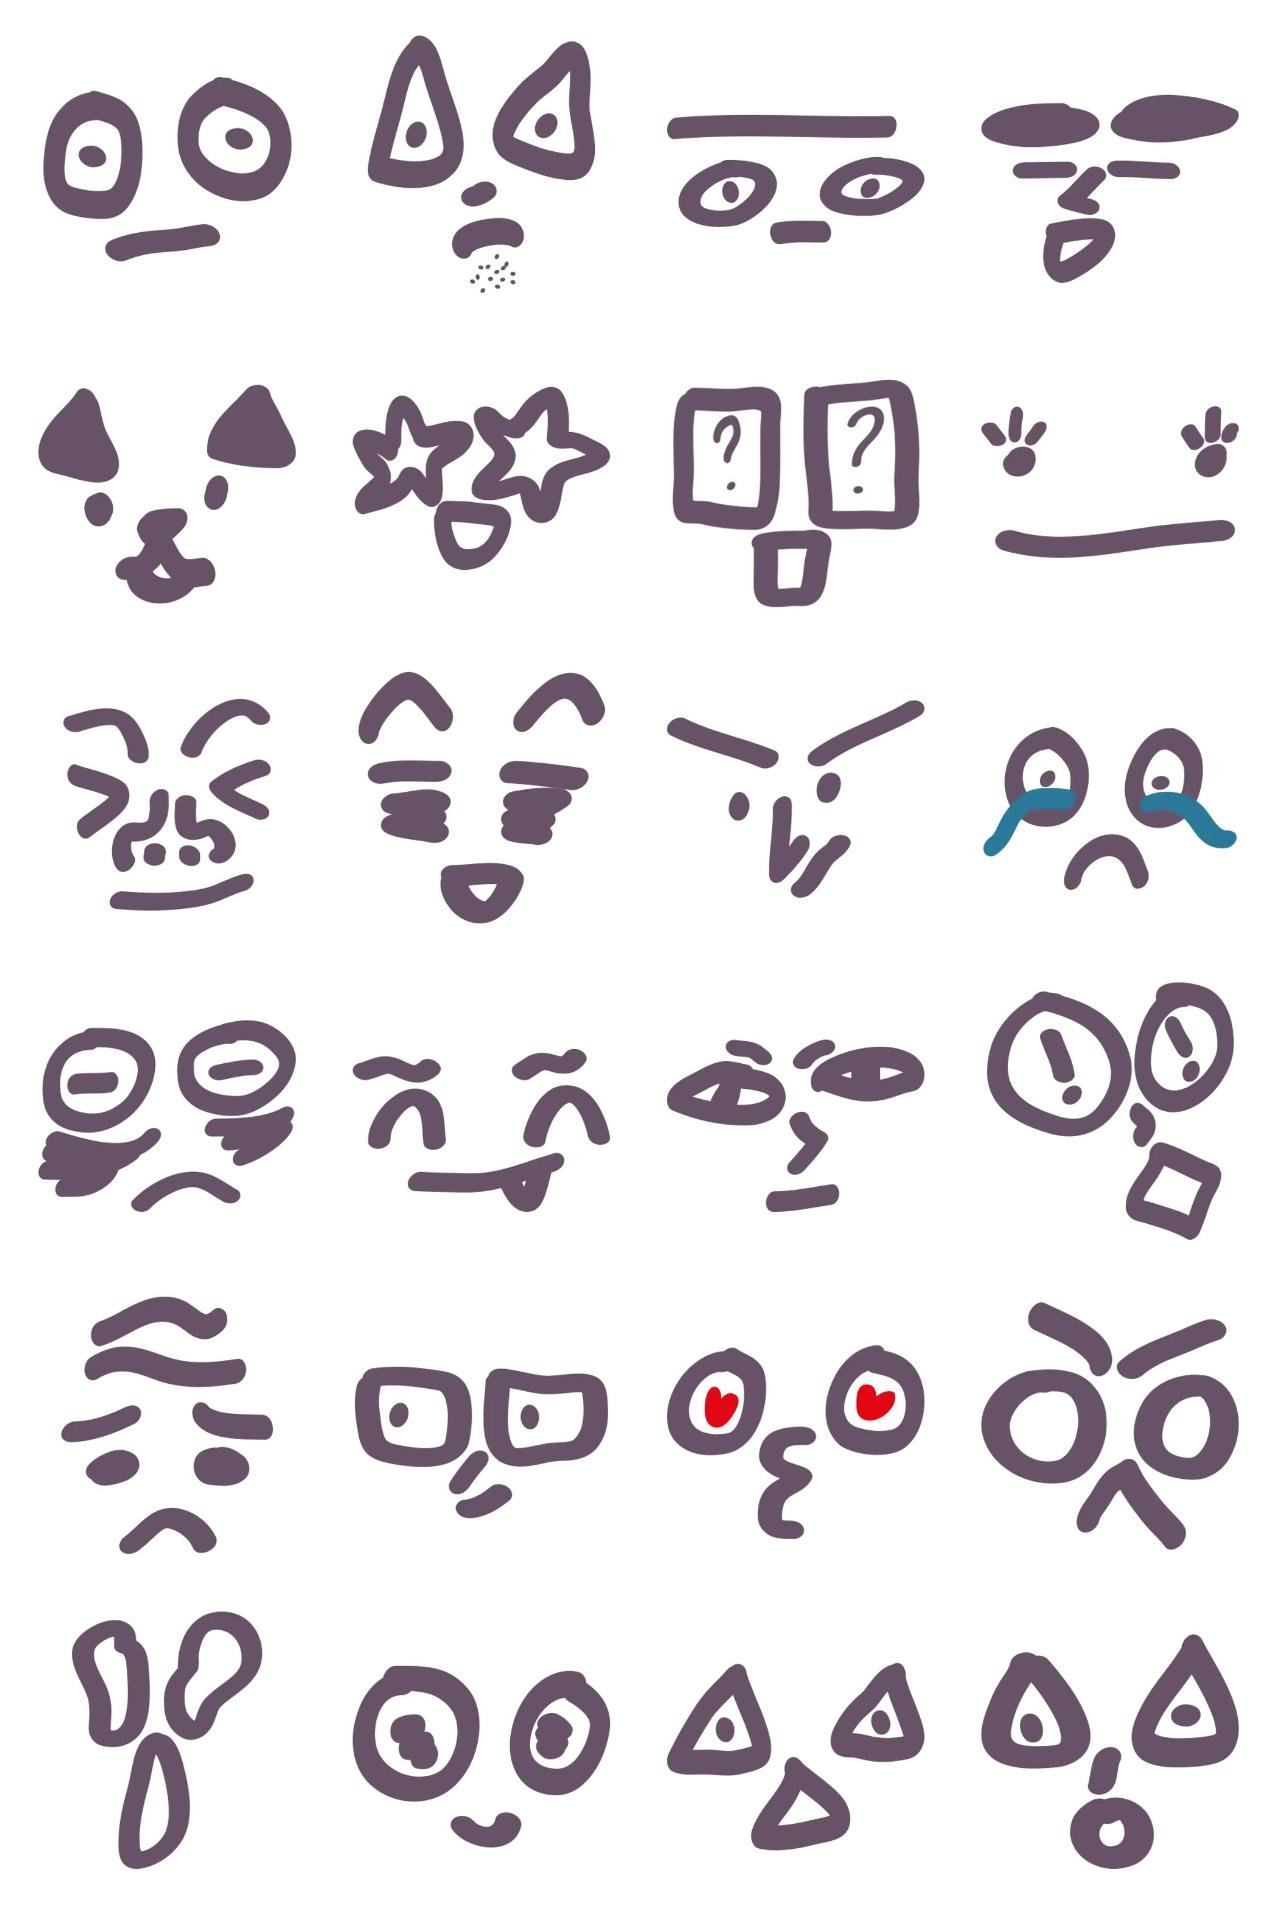 Emotional Expression Signs People,Etc. sticker pack for Whatsapp, Telegram, Signal, and others chatting and message apps